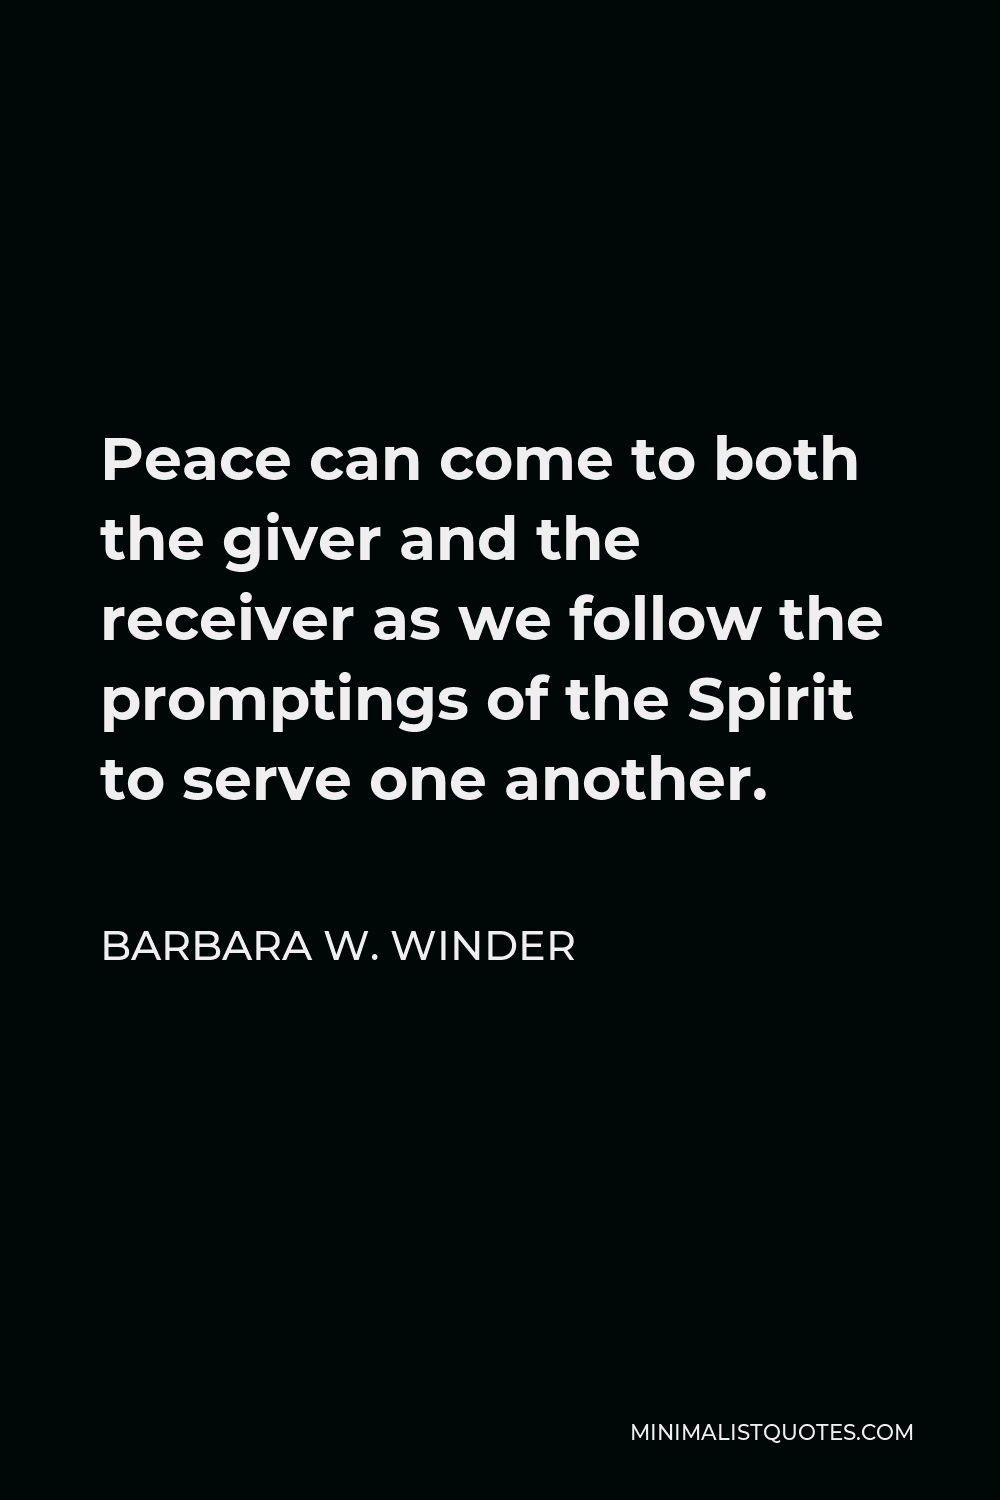 Barbara W. Winder Quote - Peace can come to both the giver and the receiver as we follow the promptings of the Spirit to serve one another.